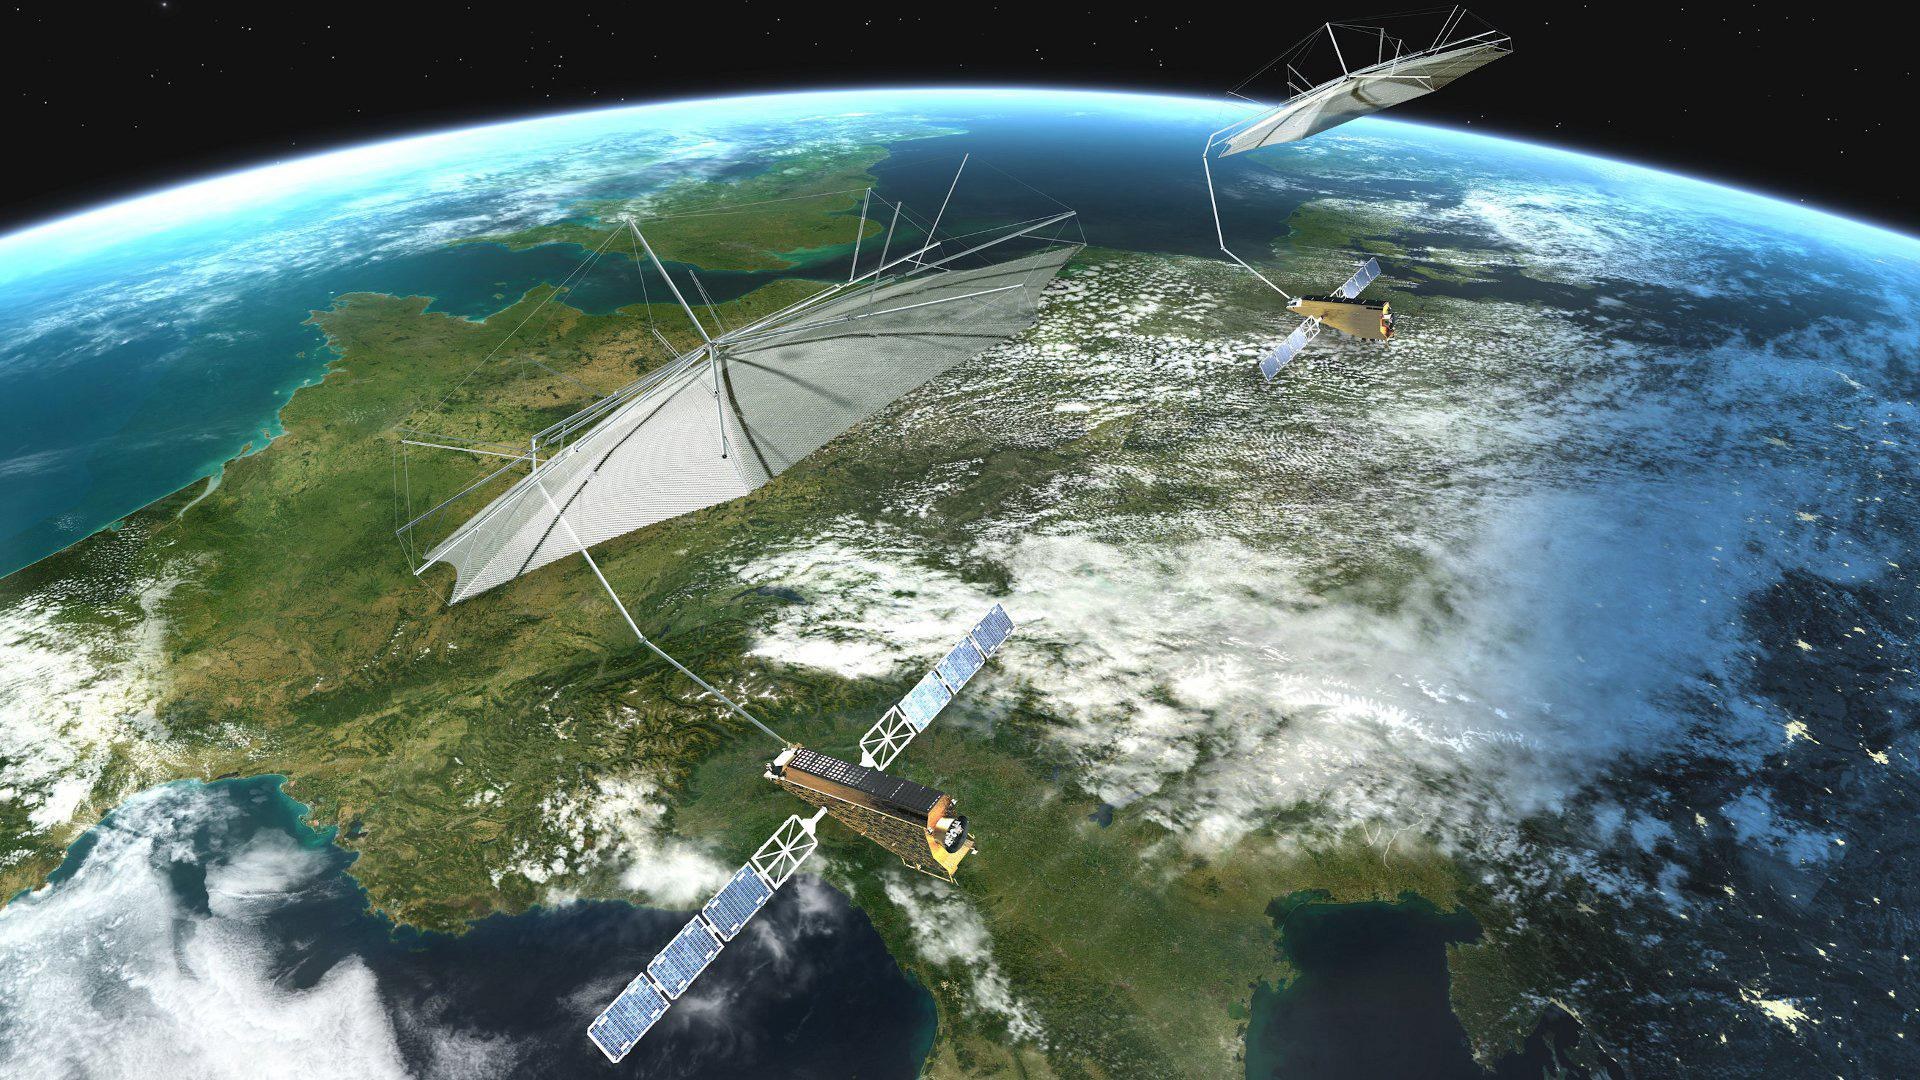 Tandem-L is a proposal for a highly innovative satellite mission for the global observation of dynamic processes on the Earth’s surface